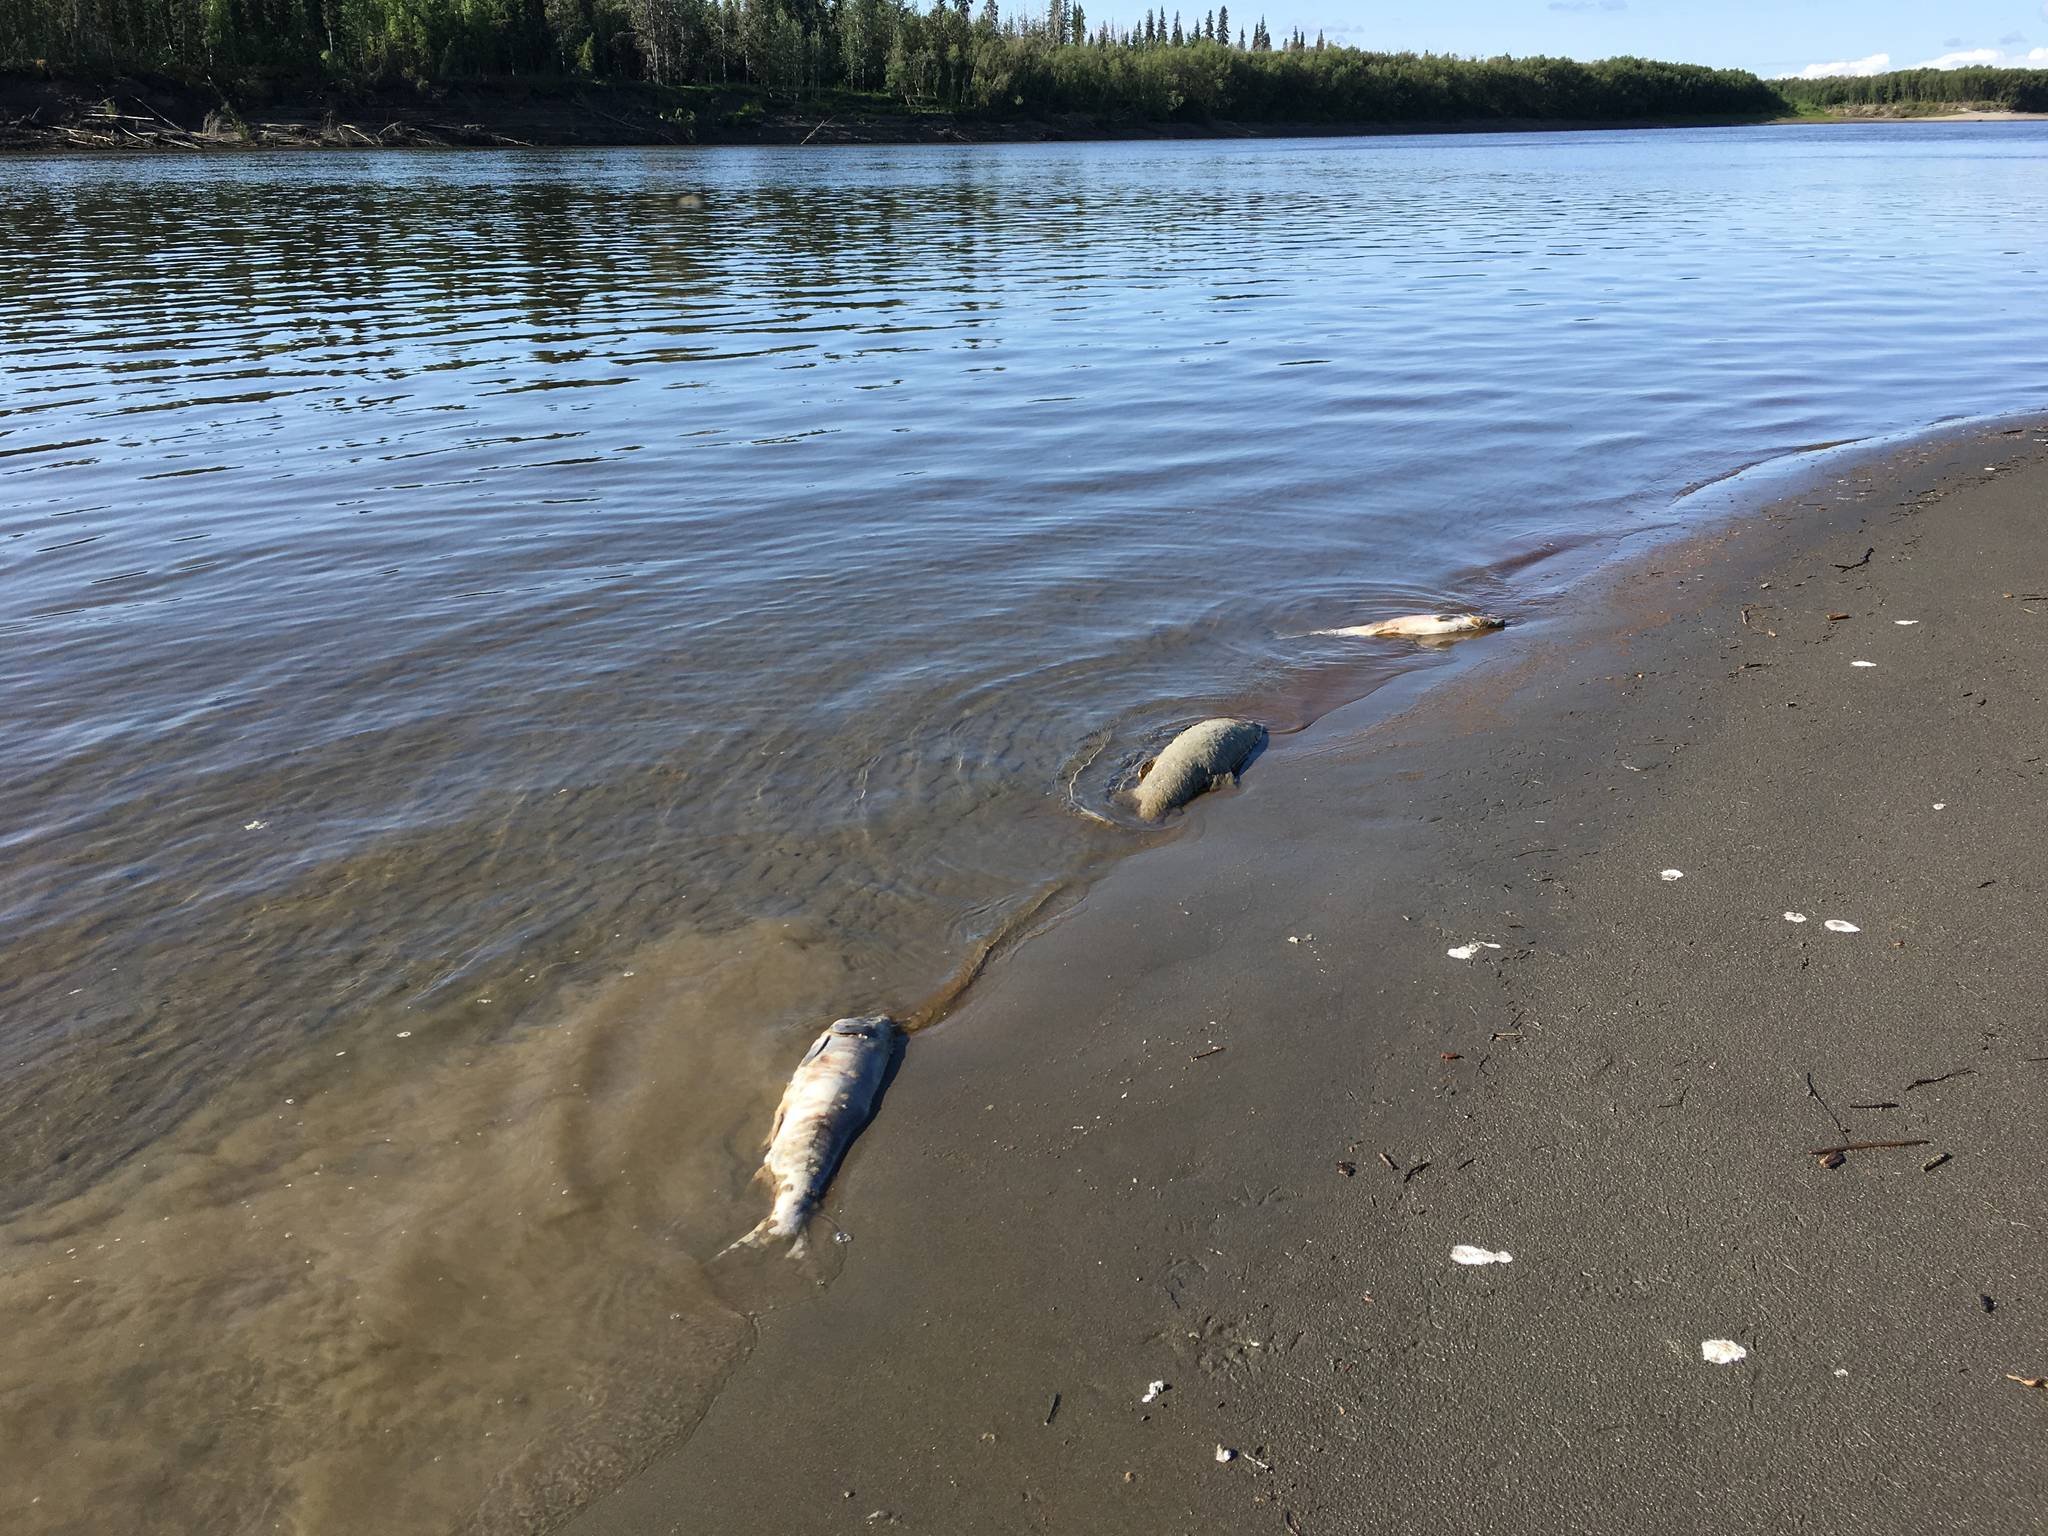 Dead, unspawned chum salmon line the banks of the Koyukuk River after a warm water event during Alaska’s unusually warm temperatures this July. (Courtesy photo | Stephanie Quinn-Davidson)